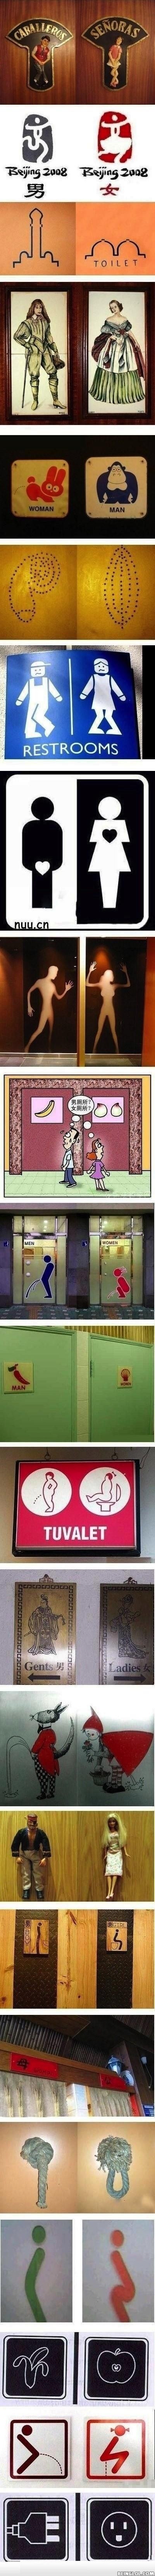 Toilet Signs From Around the World